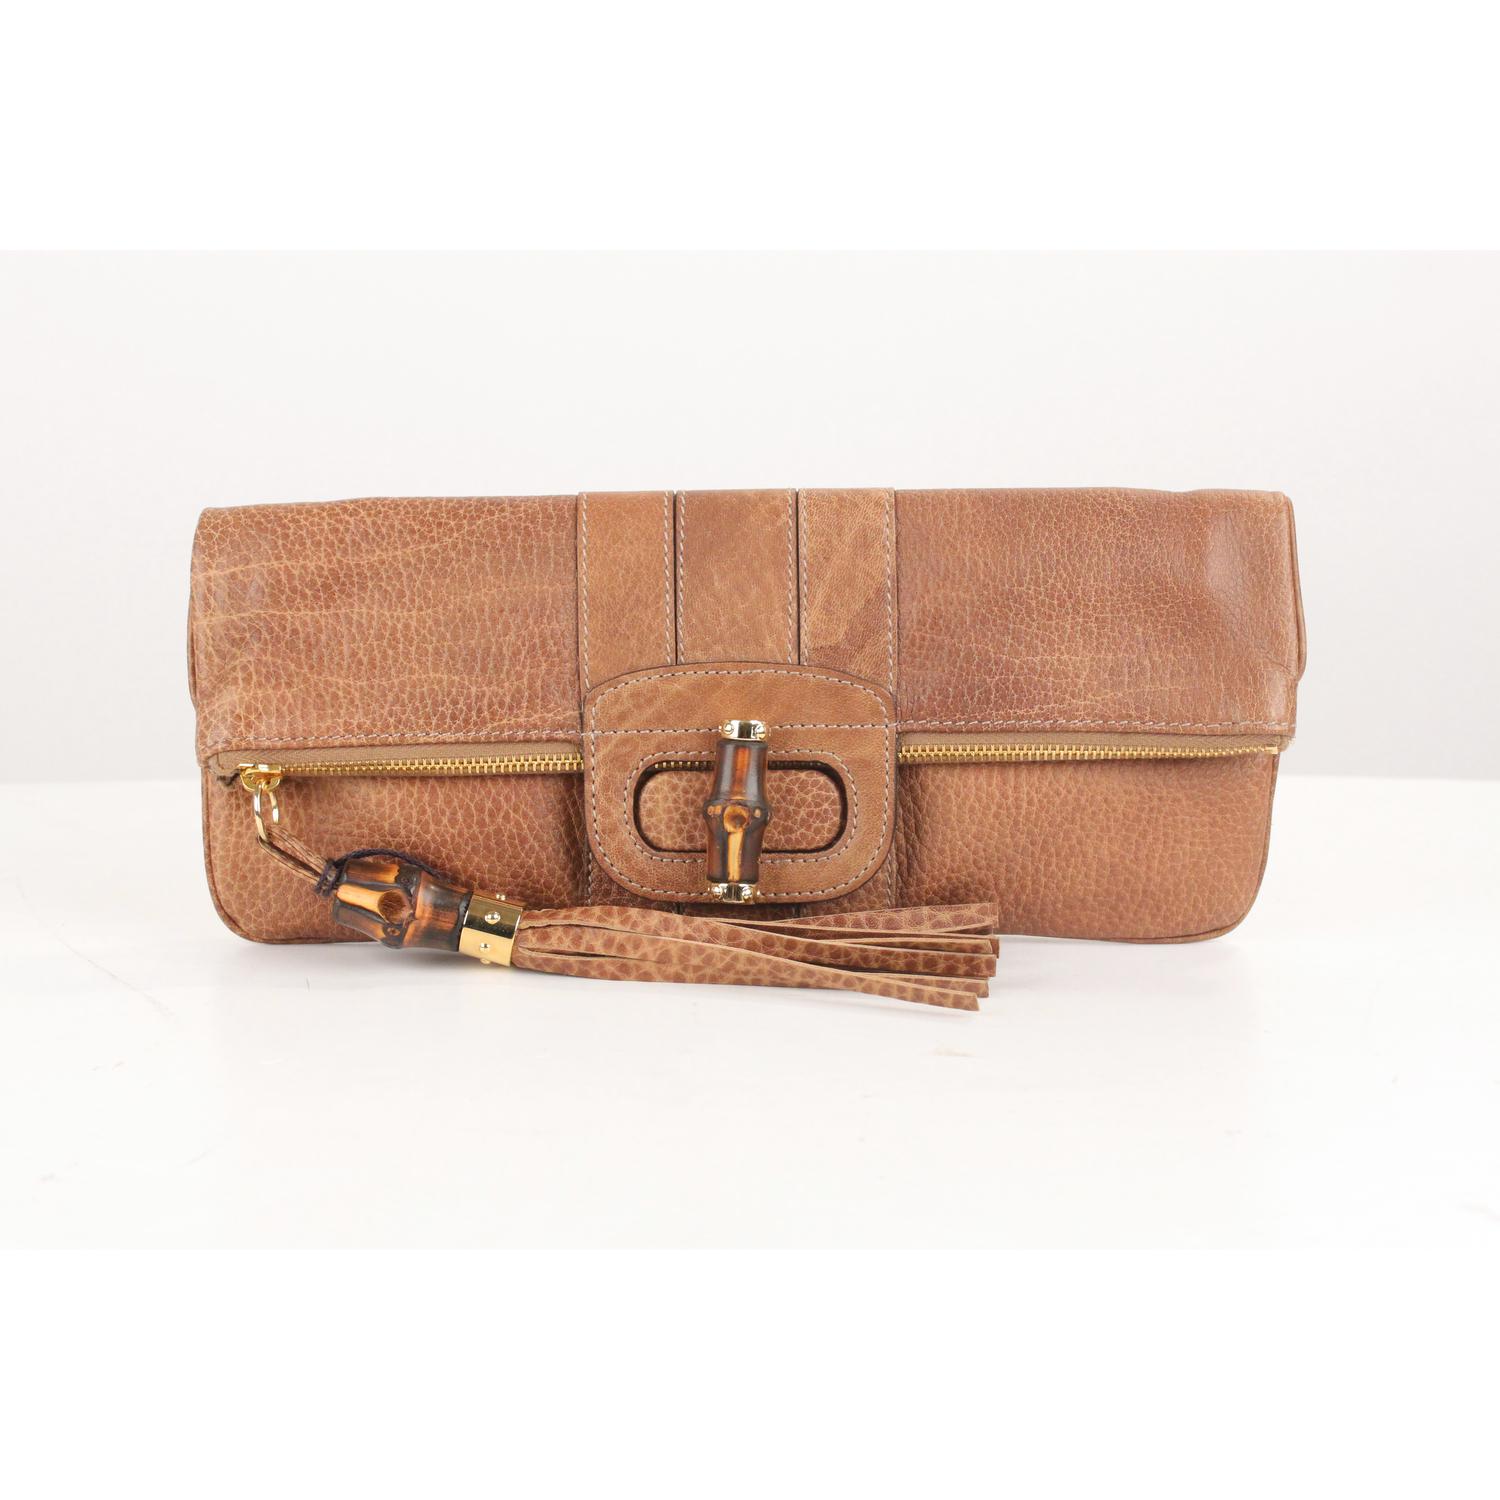 - Gucci 'Lucy' clutch bag in Tan leather
- Gold metal hardware
- Leather tassel detailing
- Bamboo accents
- Folding design
- Twist closure on the front
- Canvas lining
- 'GUCCI - Made in Italy' tag inside (with serial number on its reverse